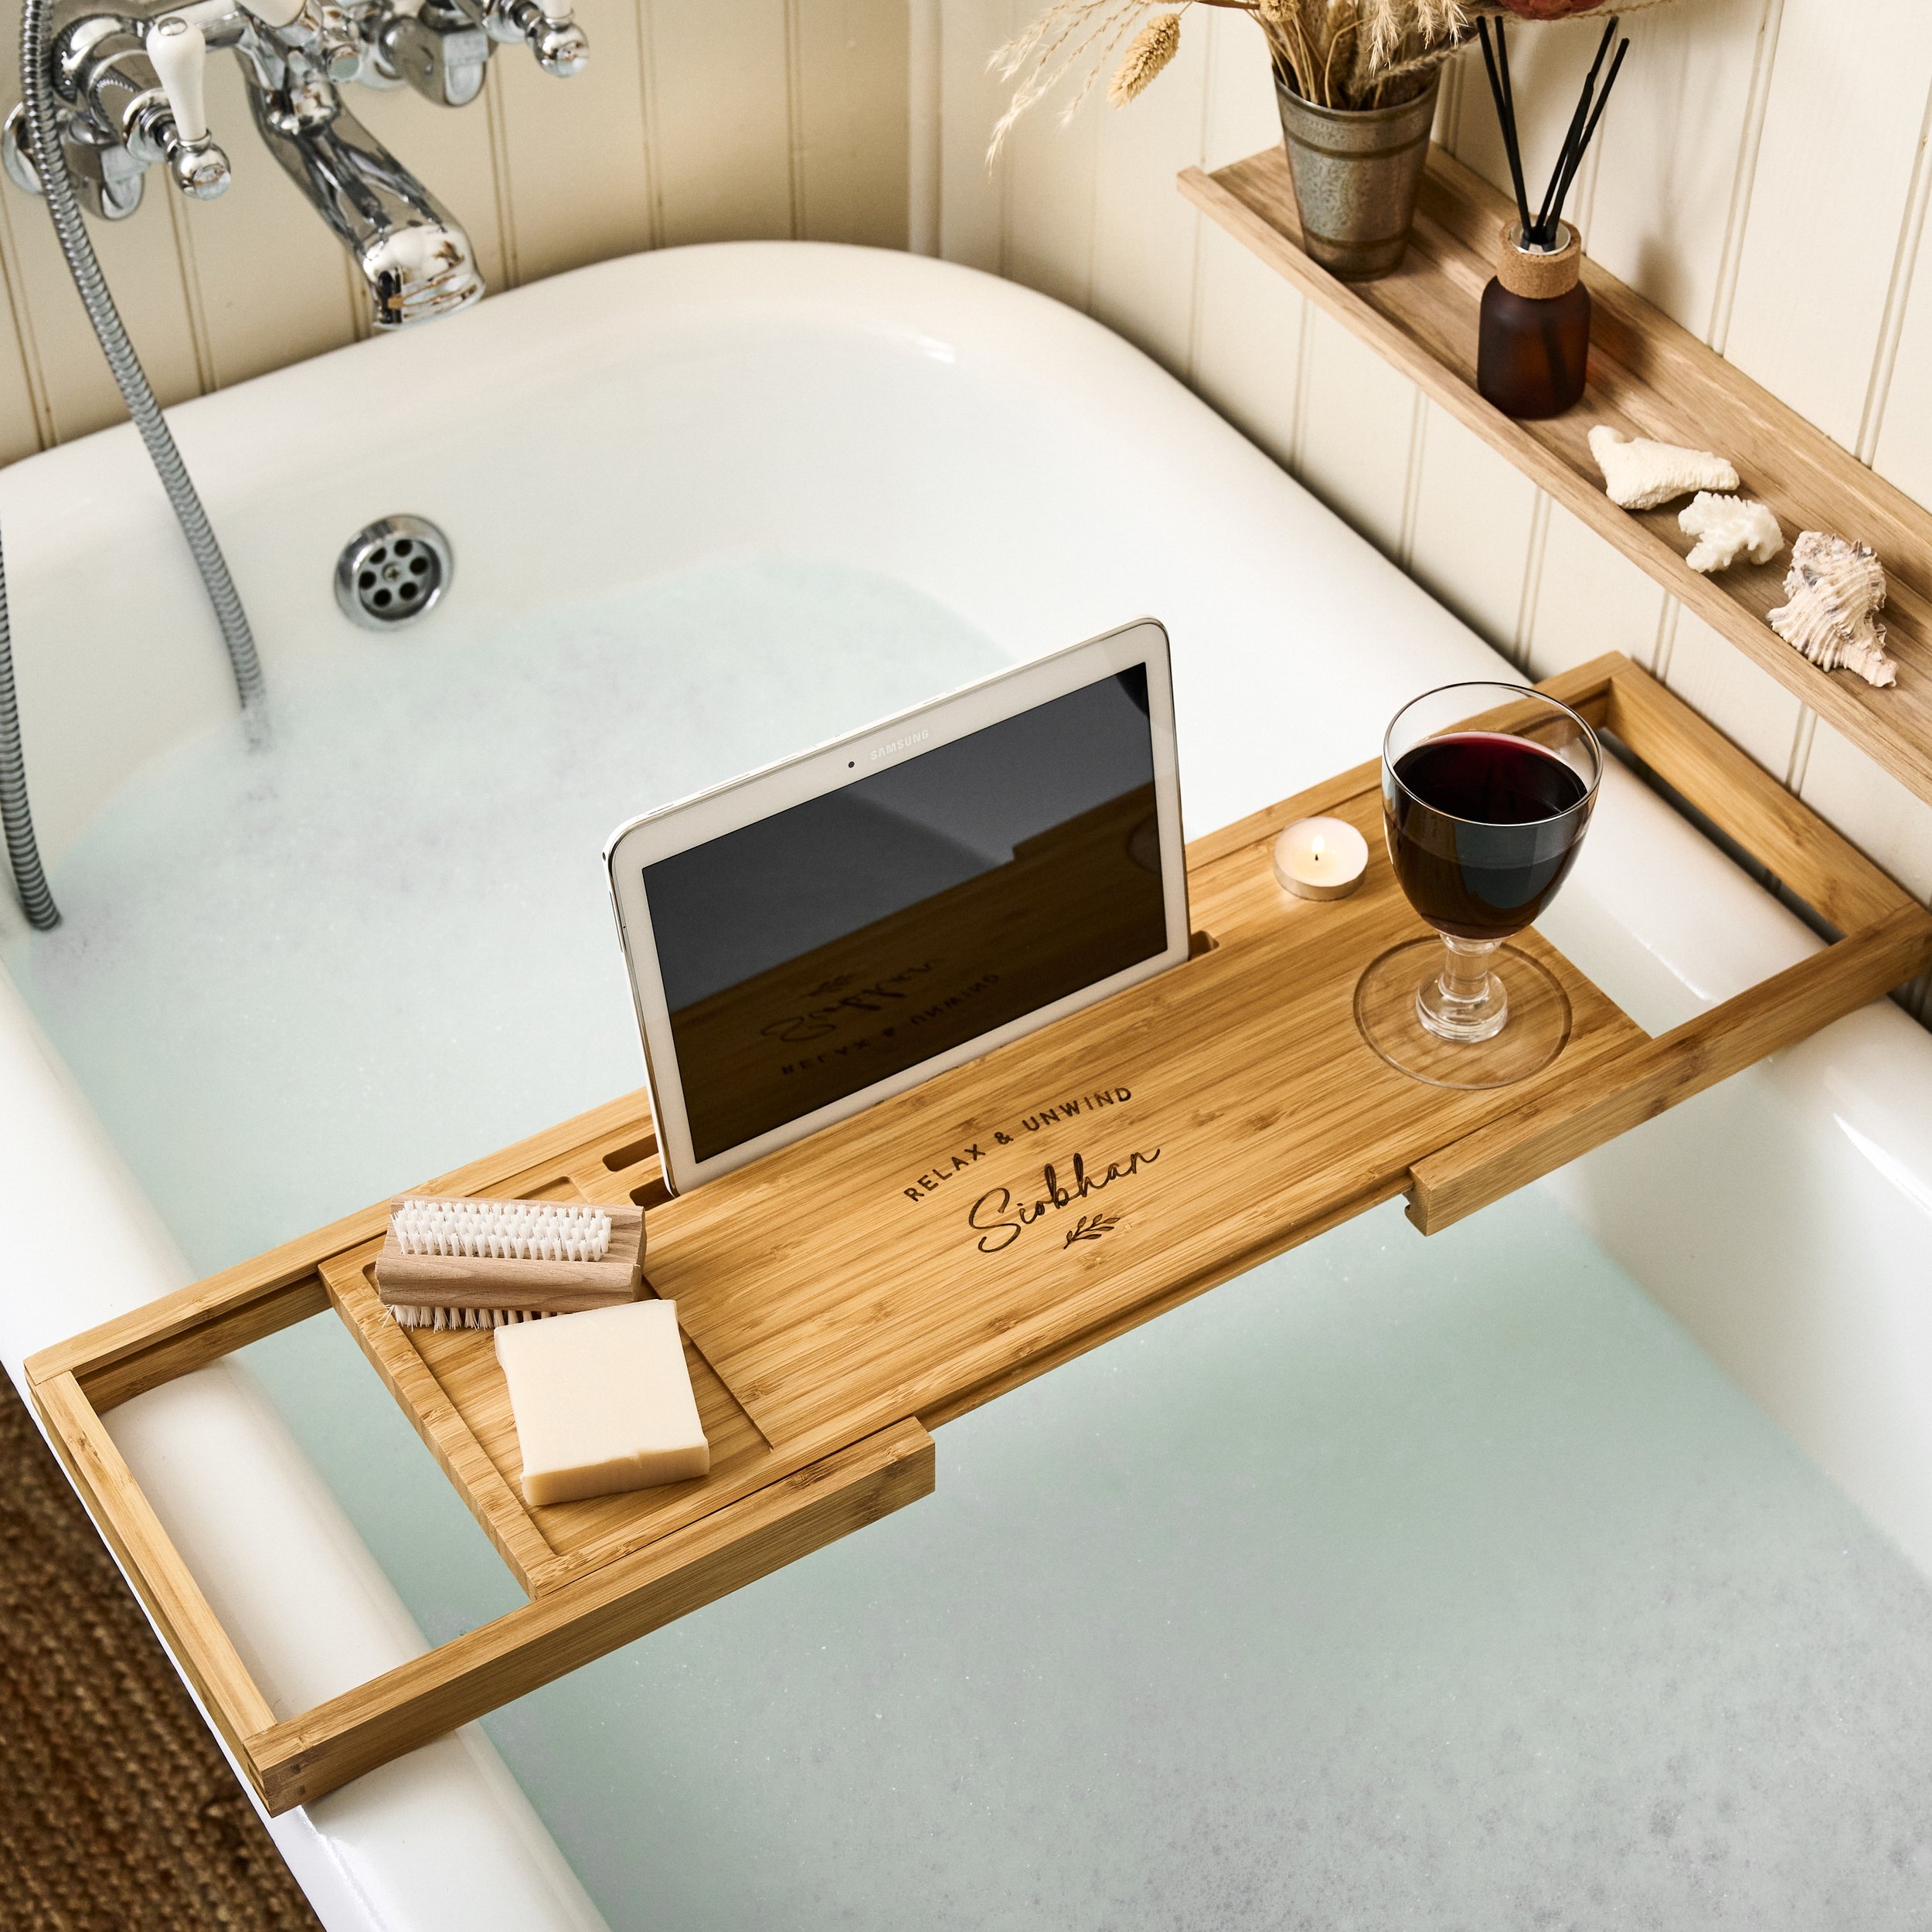 1.SUNDAY'S DAUGHTER Personalised Engraved Wooden Bath Caddy €52.82